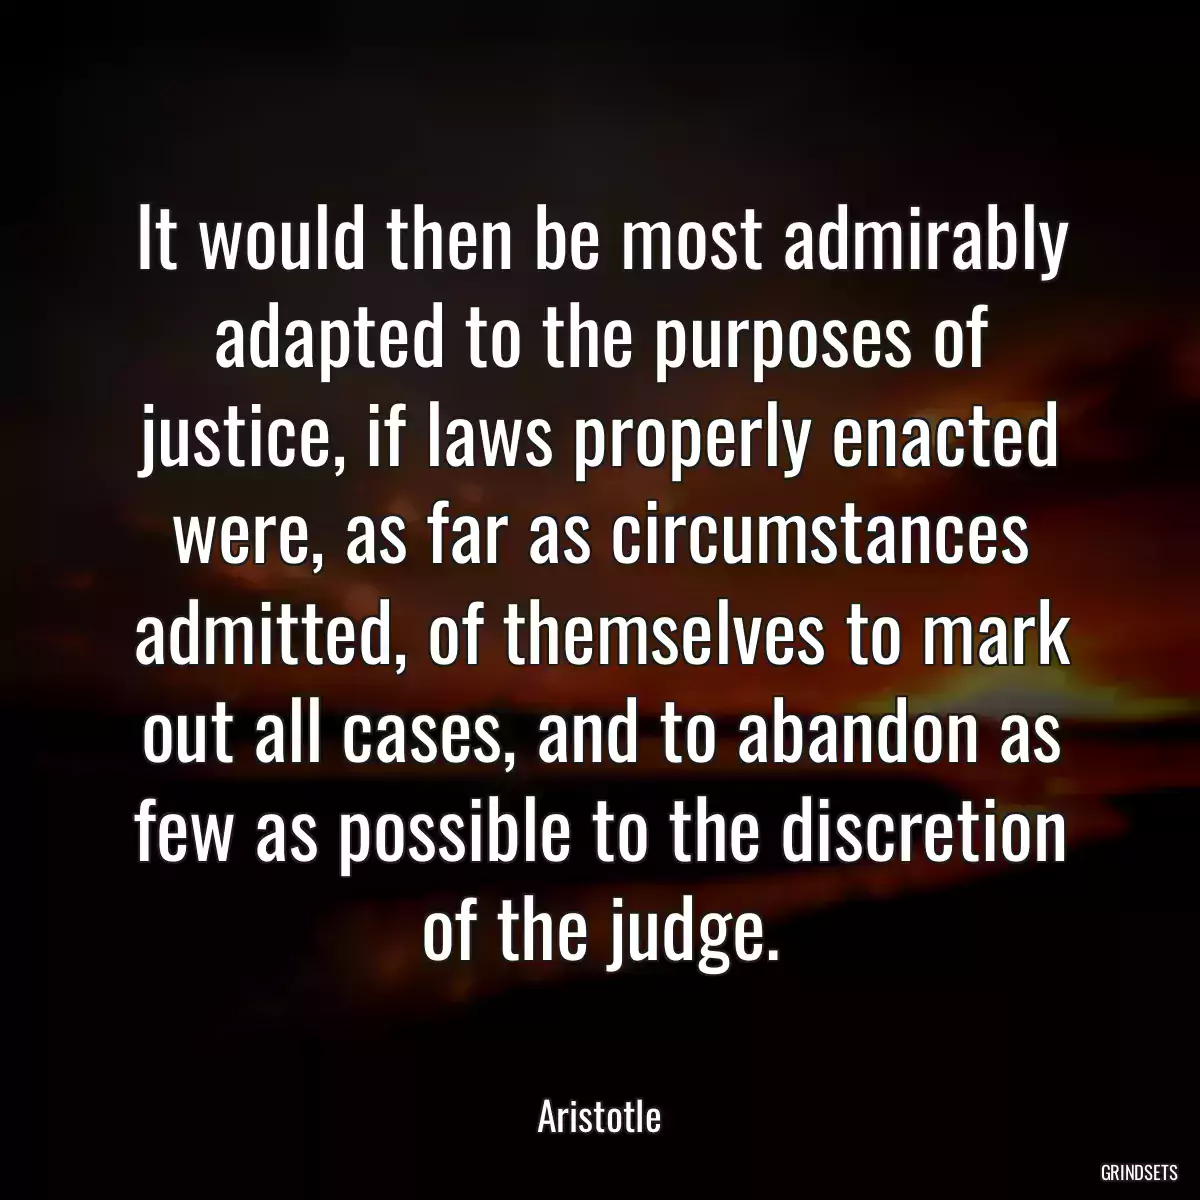 It would then be most admirably adapted to the purposes of justice, if laws properly enacted were, as far as circumstances admitted, of themselves to mark out all cases, and to abandon as few as possible to the discretion of the judge.